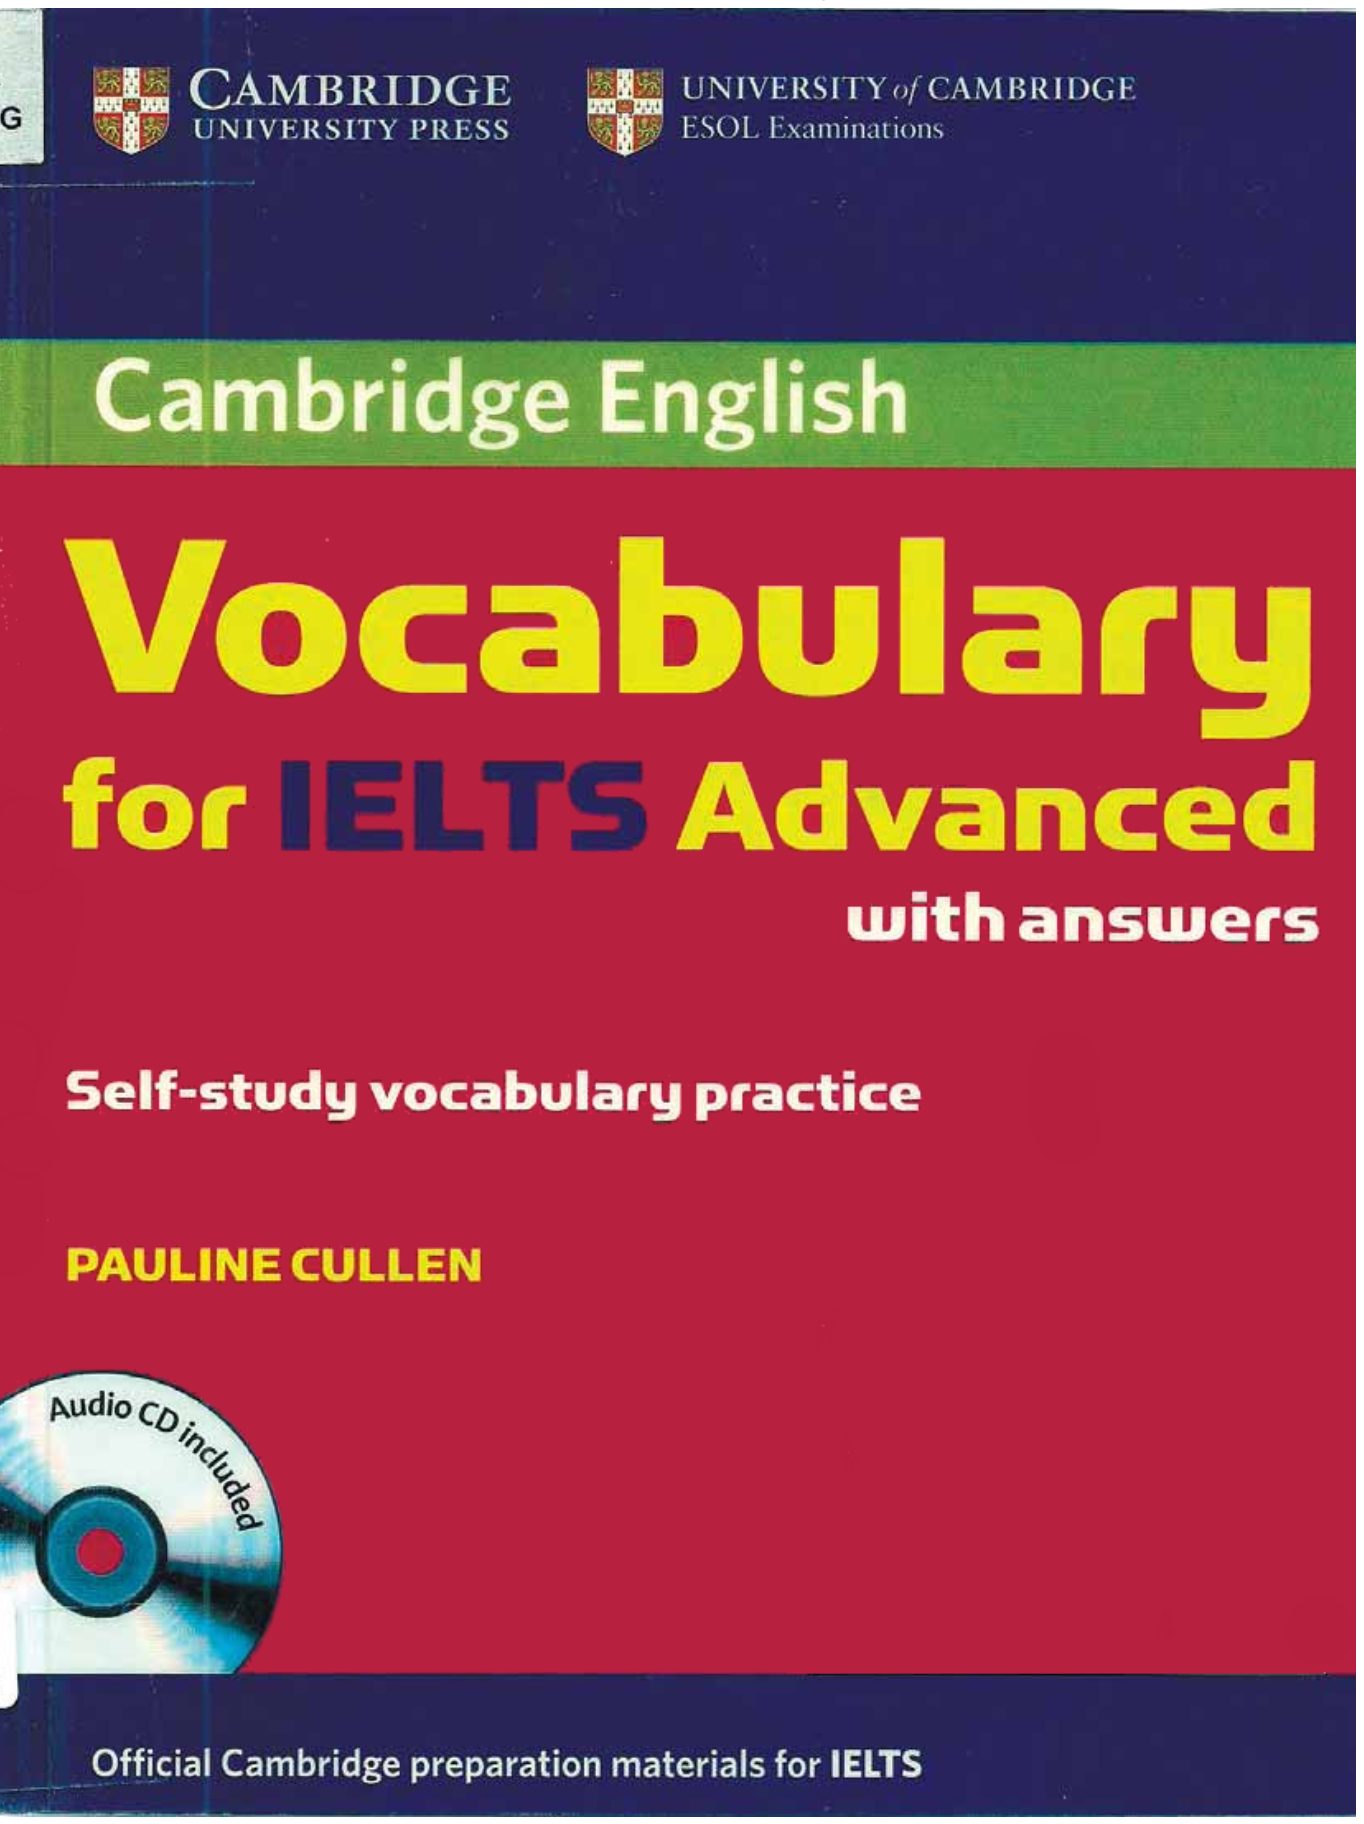 cambridge-vocabulary-for-ielts-advanced-with-answers-pdf-free-download